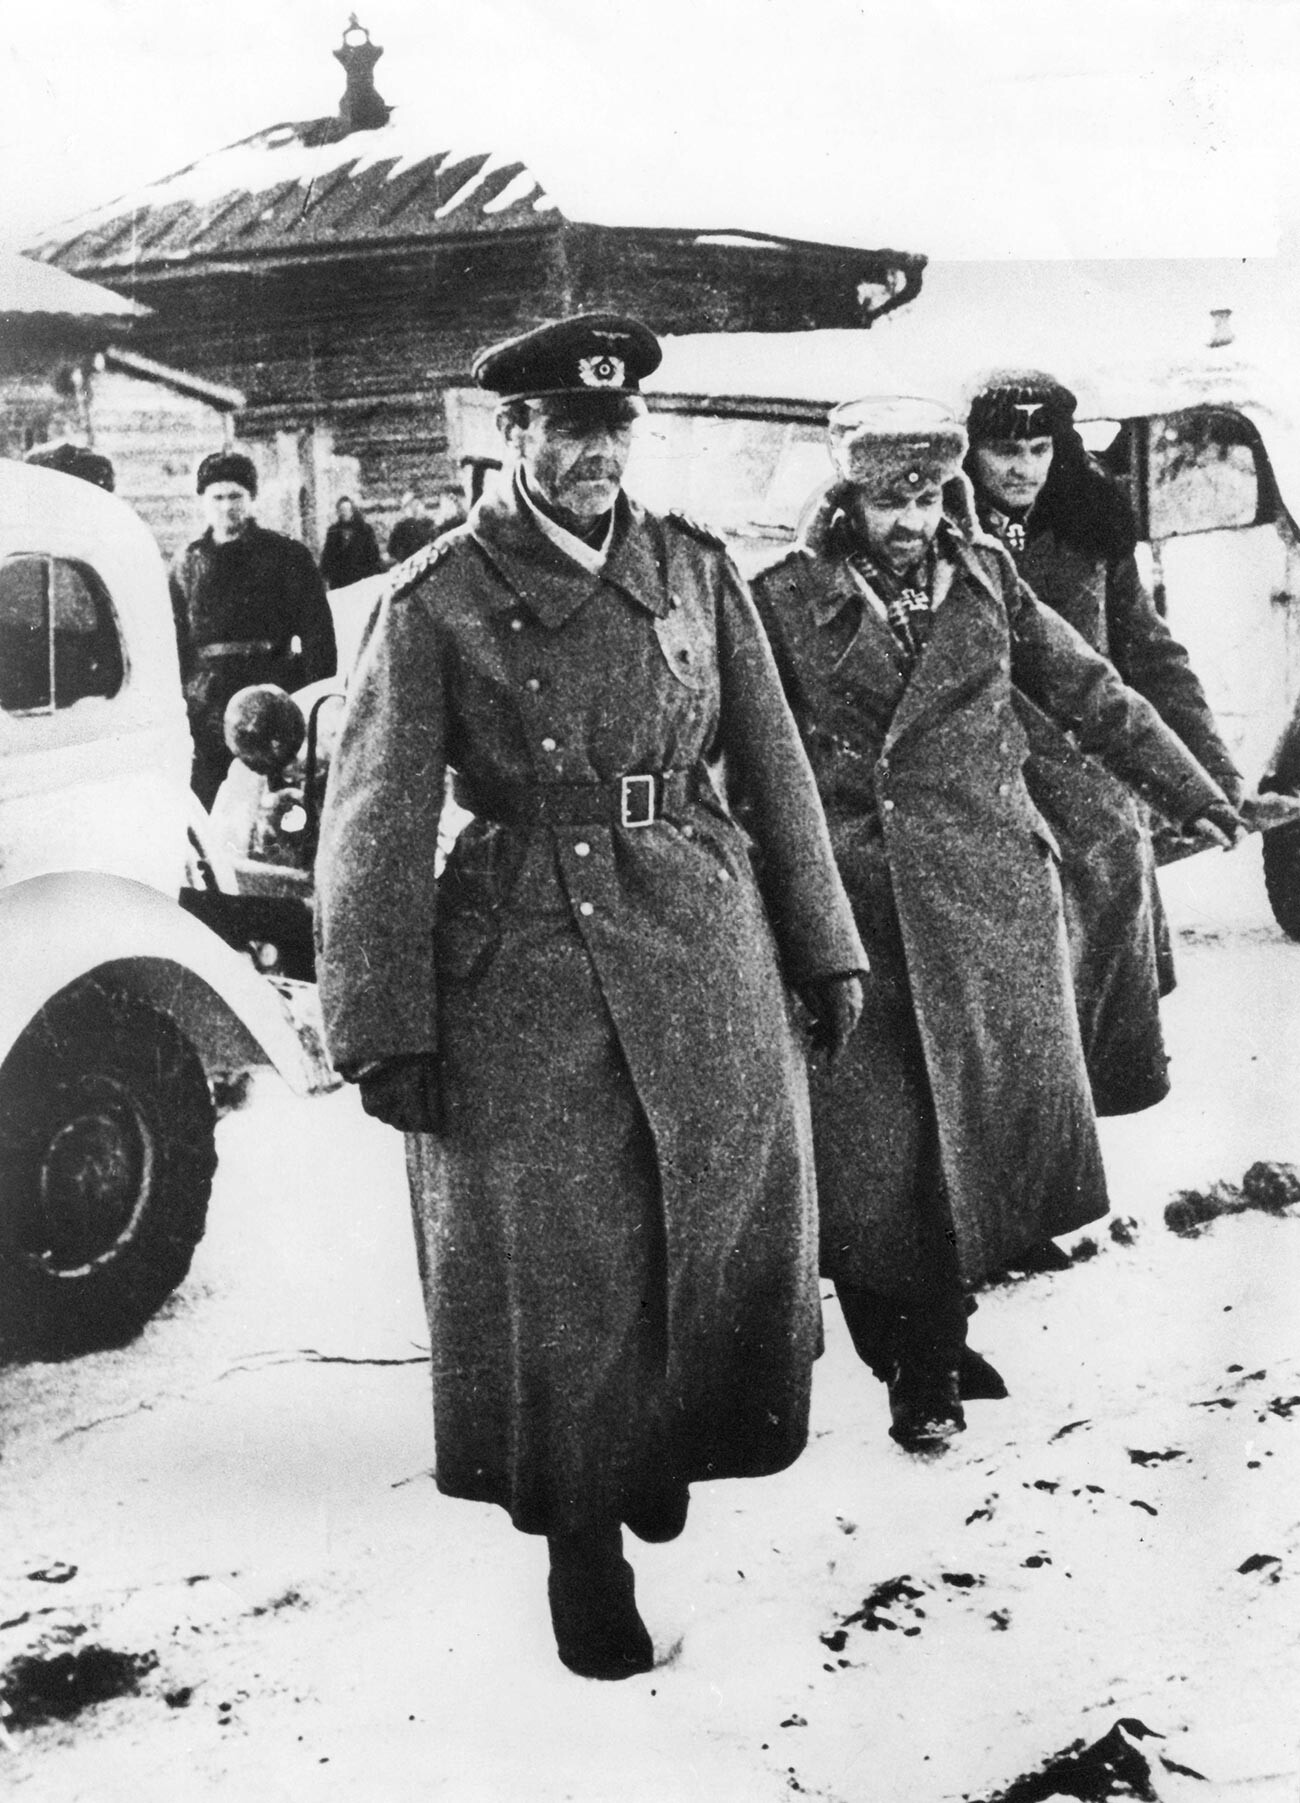 Field Marshal Friedrich Paulus captured by the Red Army during the Battle of Stalingrad, Soviet Union, 1943. 